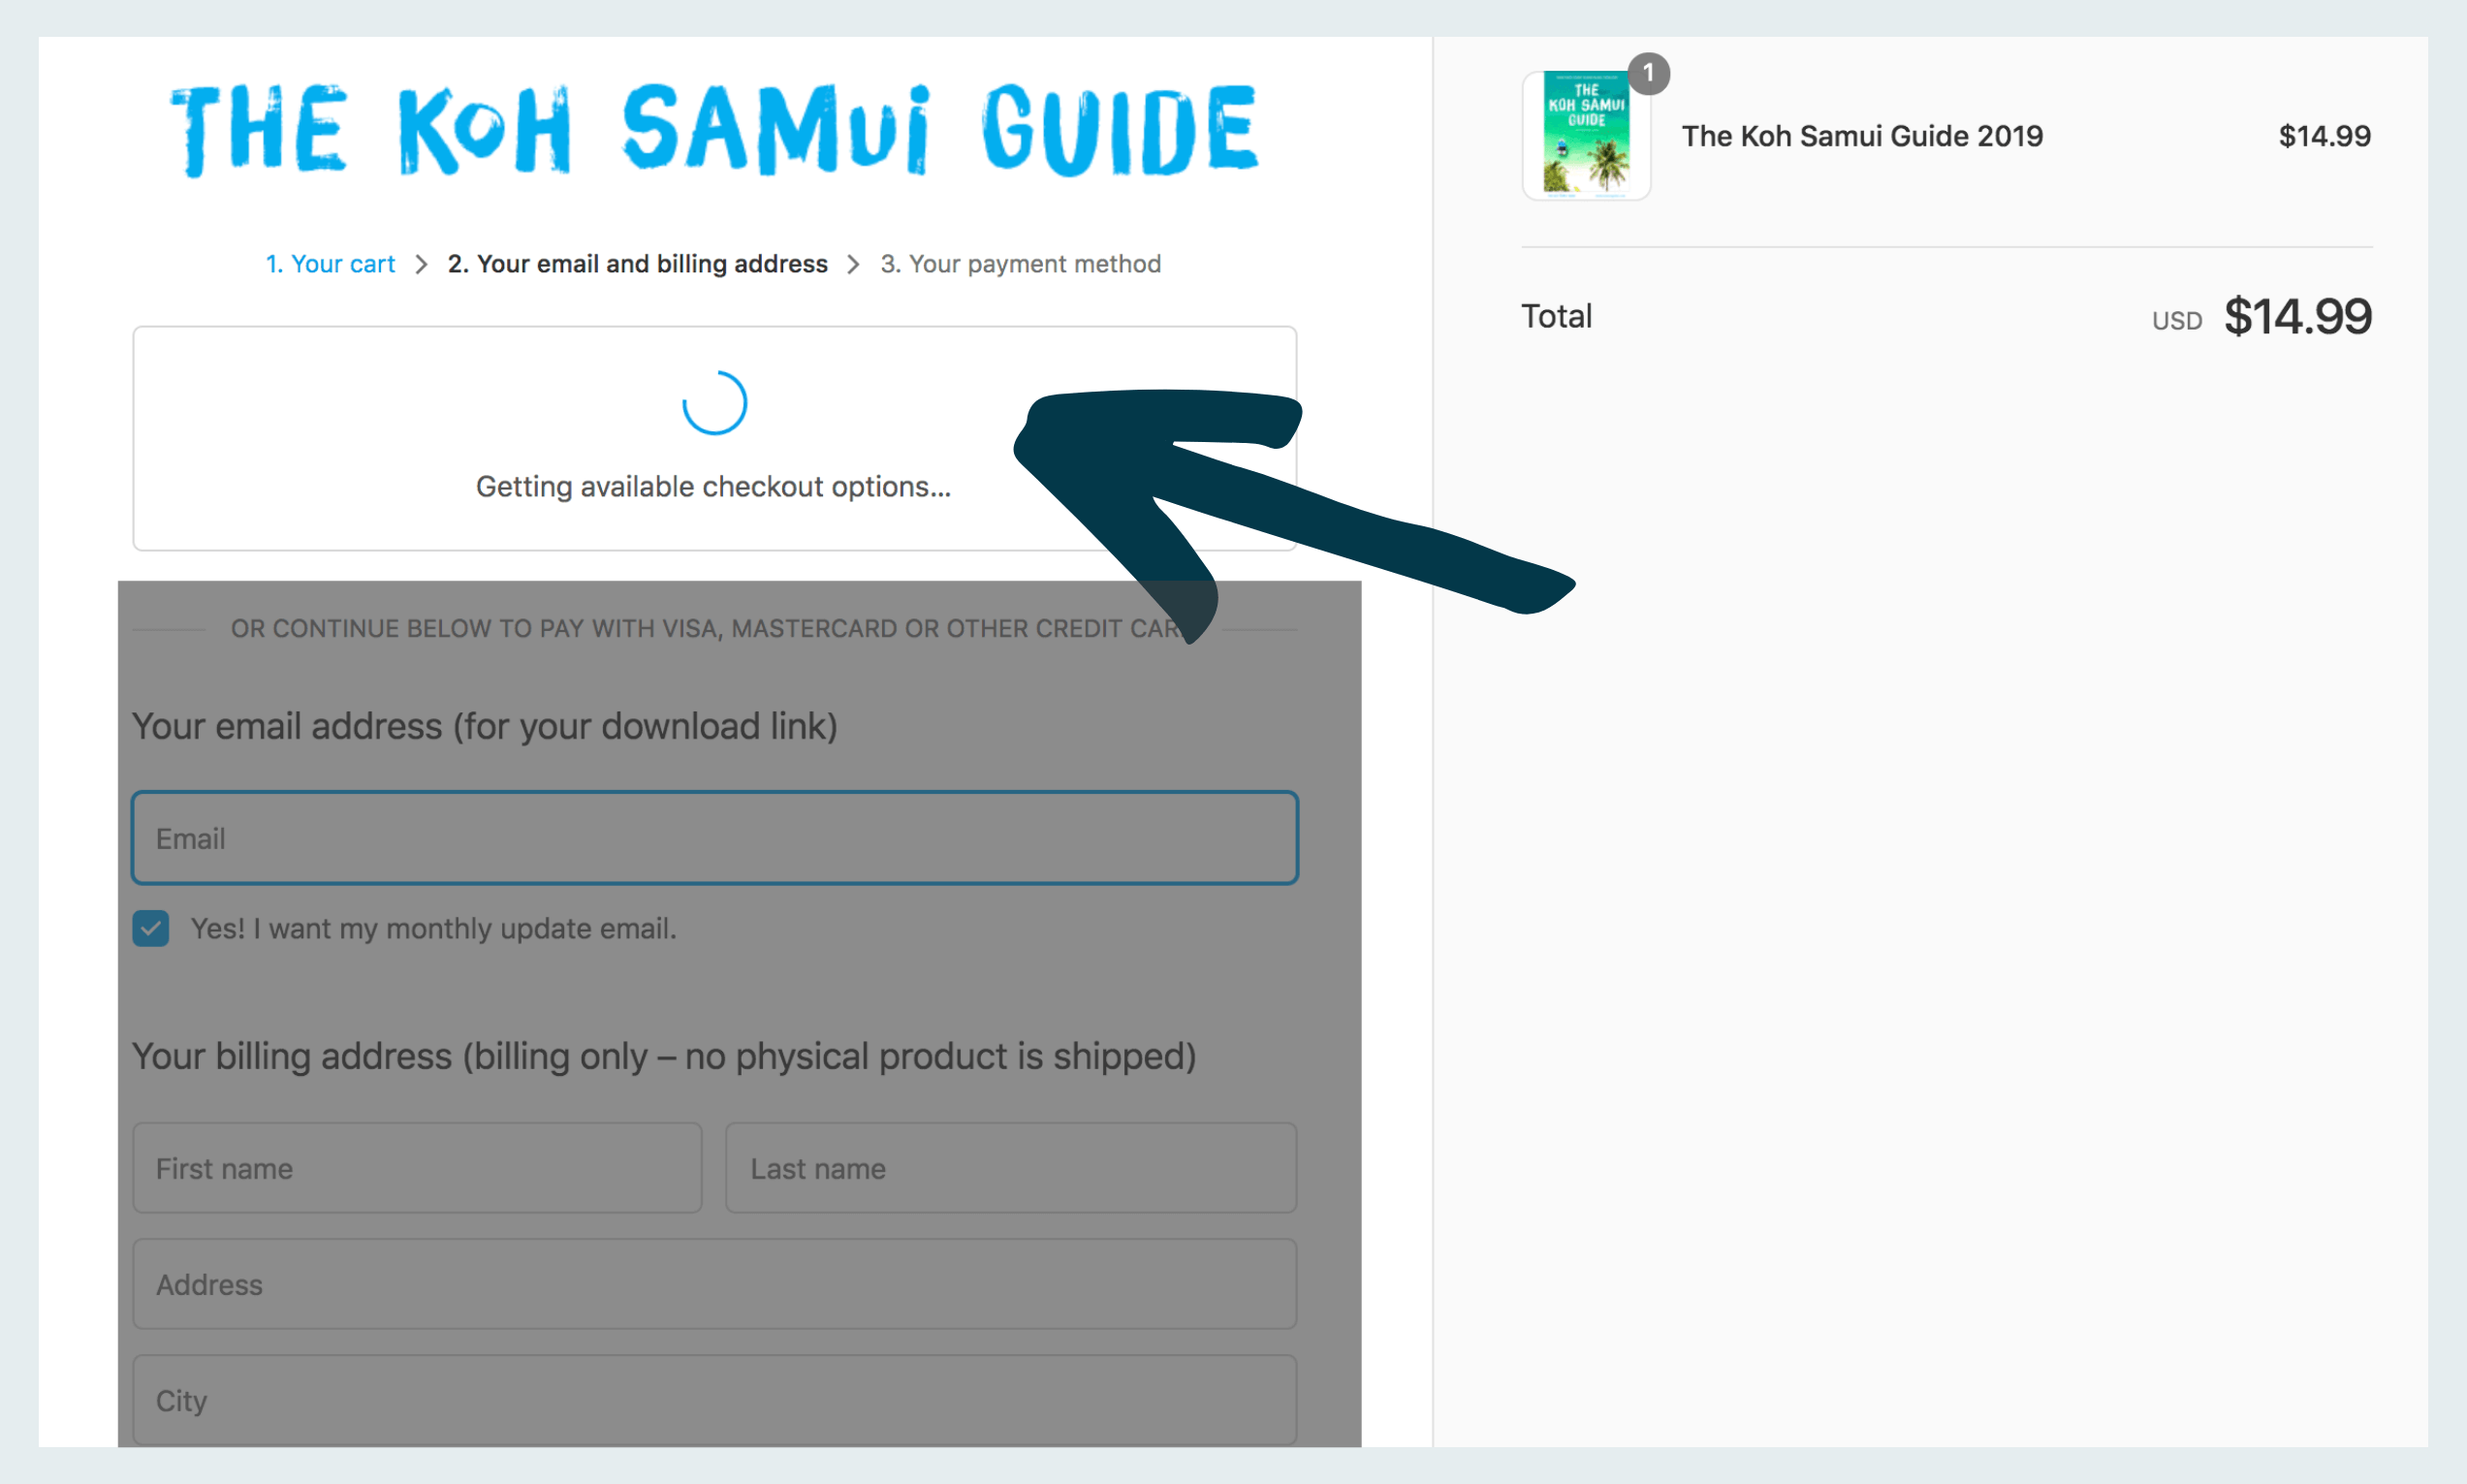 Step-by-step instructions for how to purchase The Koh Samui Guide with PayPal: Step one